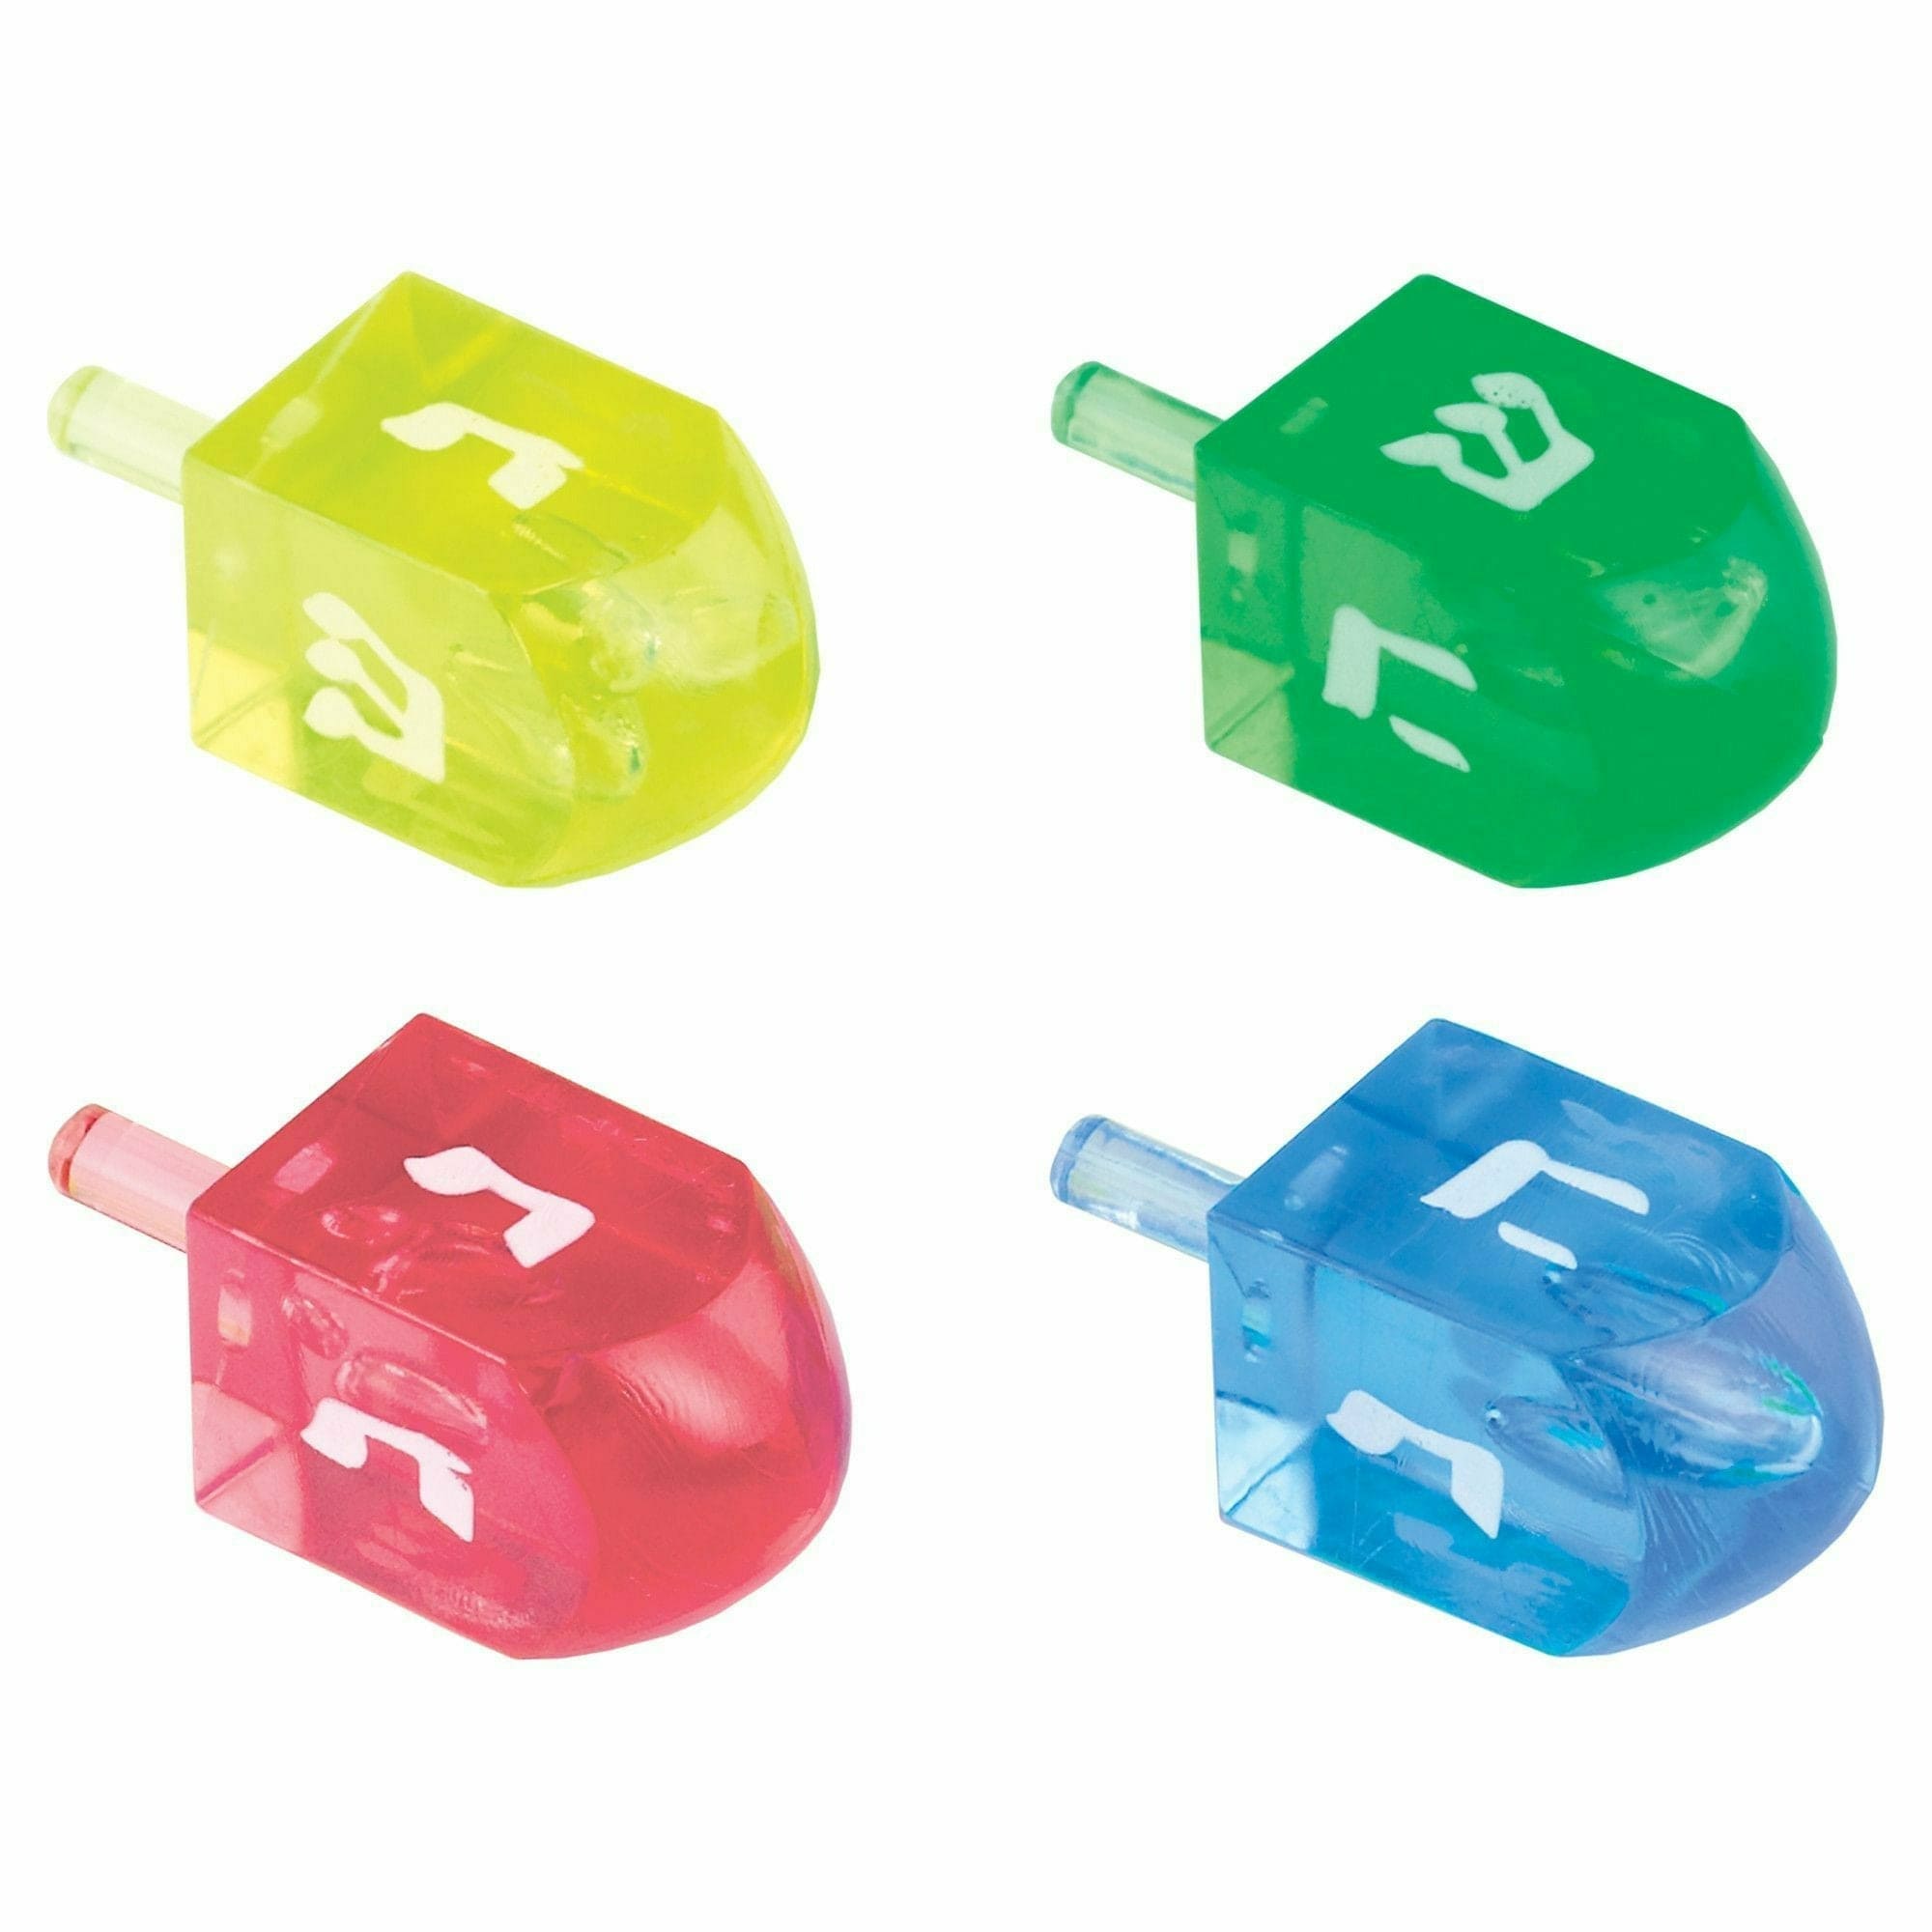 Amscan HOLIDAY: NEW YEAR'S Plastic Dreidel Game - Packaged